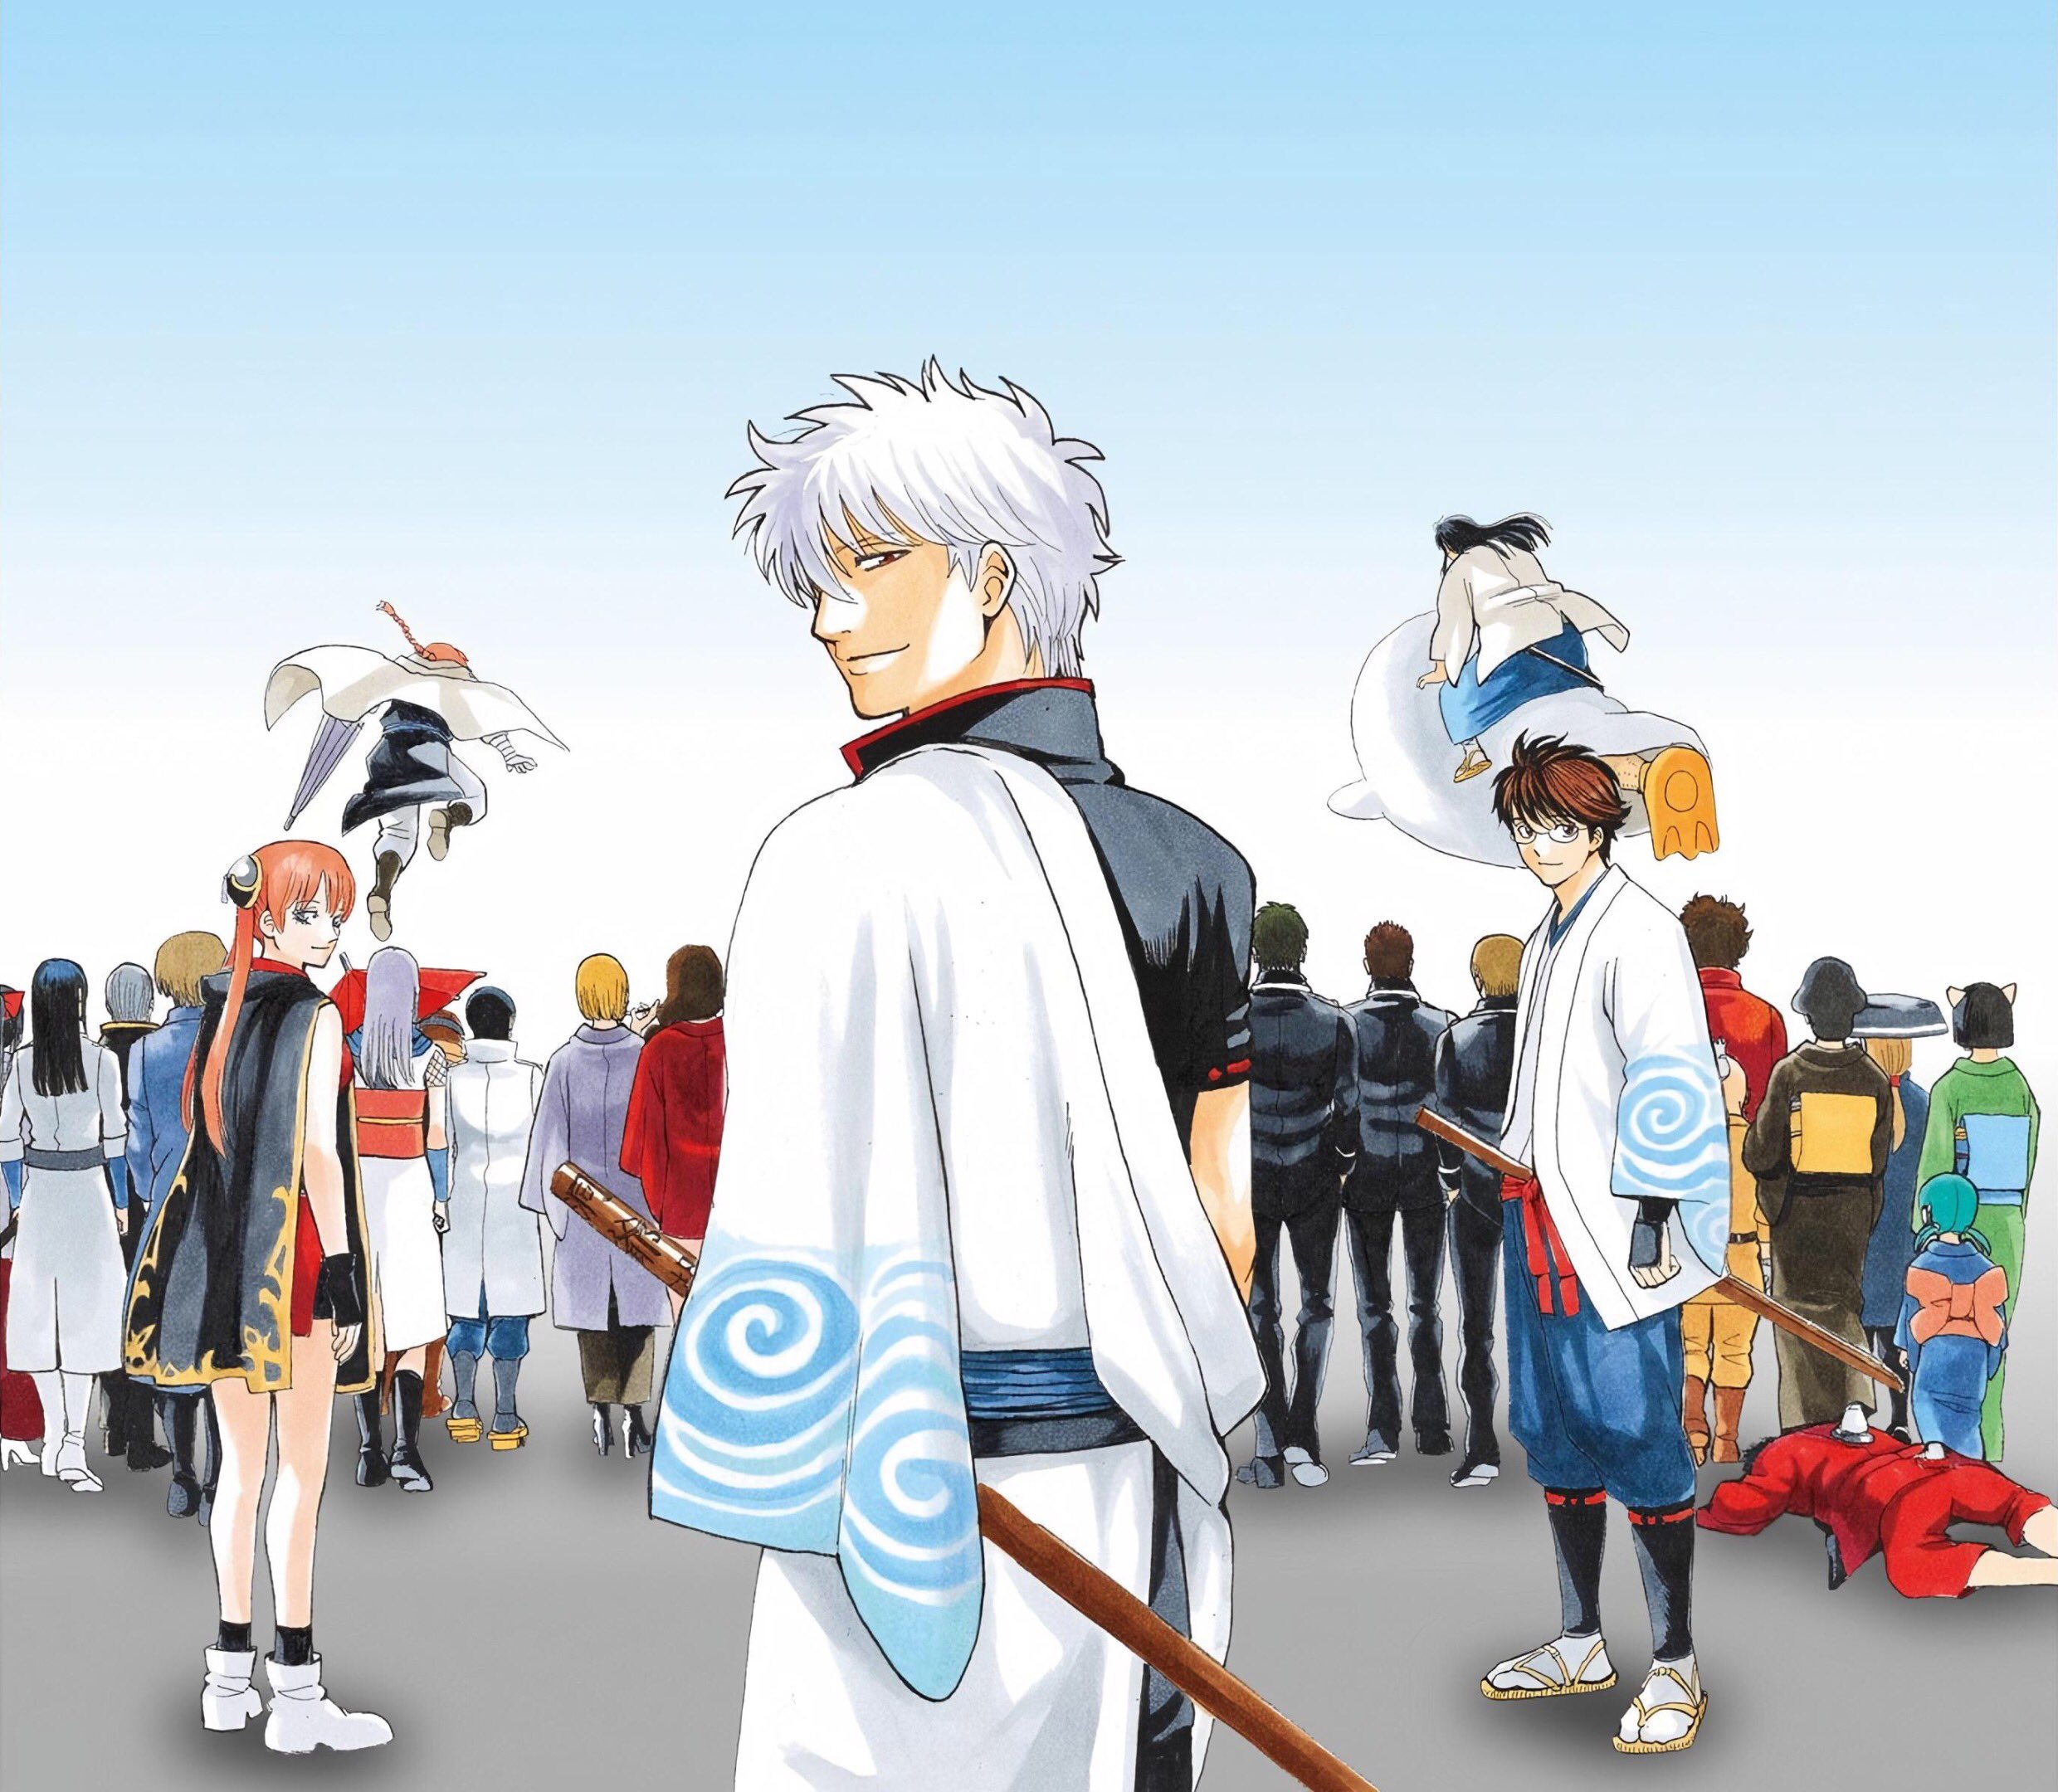 Platon Thank You Miura Netvojne Gintama Final Chapters Color Pages Textless Hd 銀魂 Gintama T Co Lz7uif5rq3 Twitter